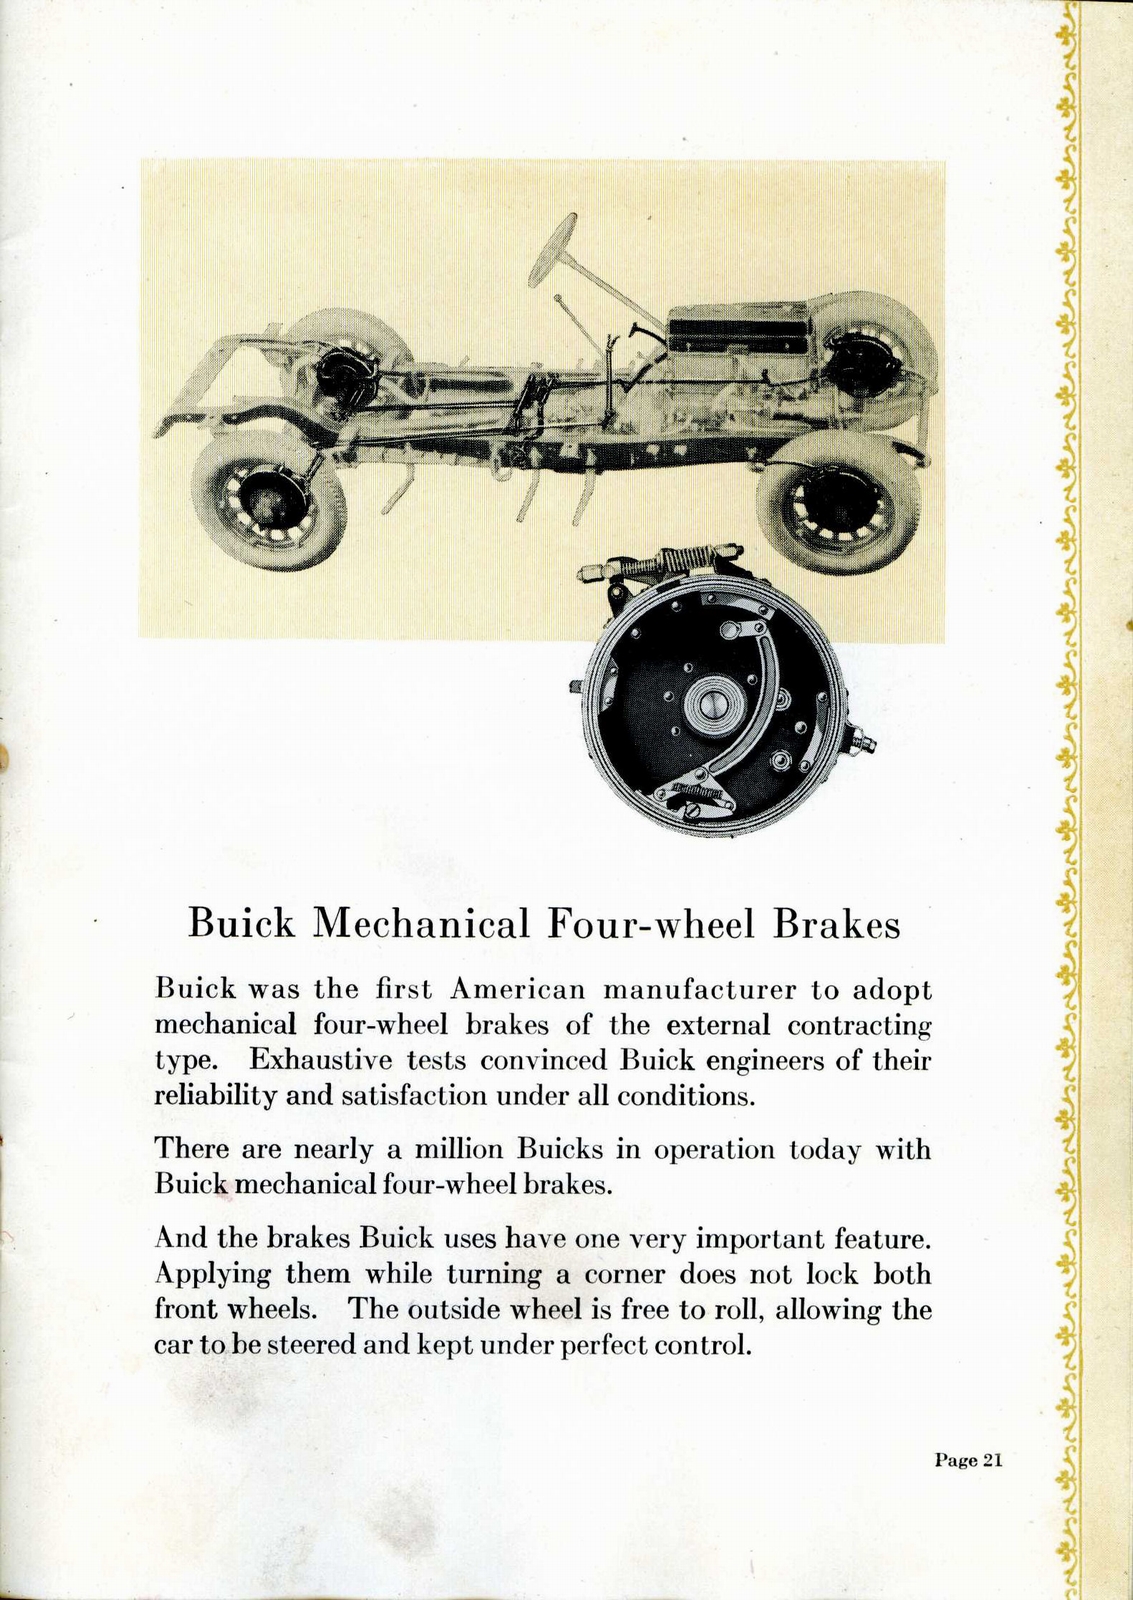 n_1928 Buick-How to Choose a Motor Car Wisely-21.jpg